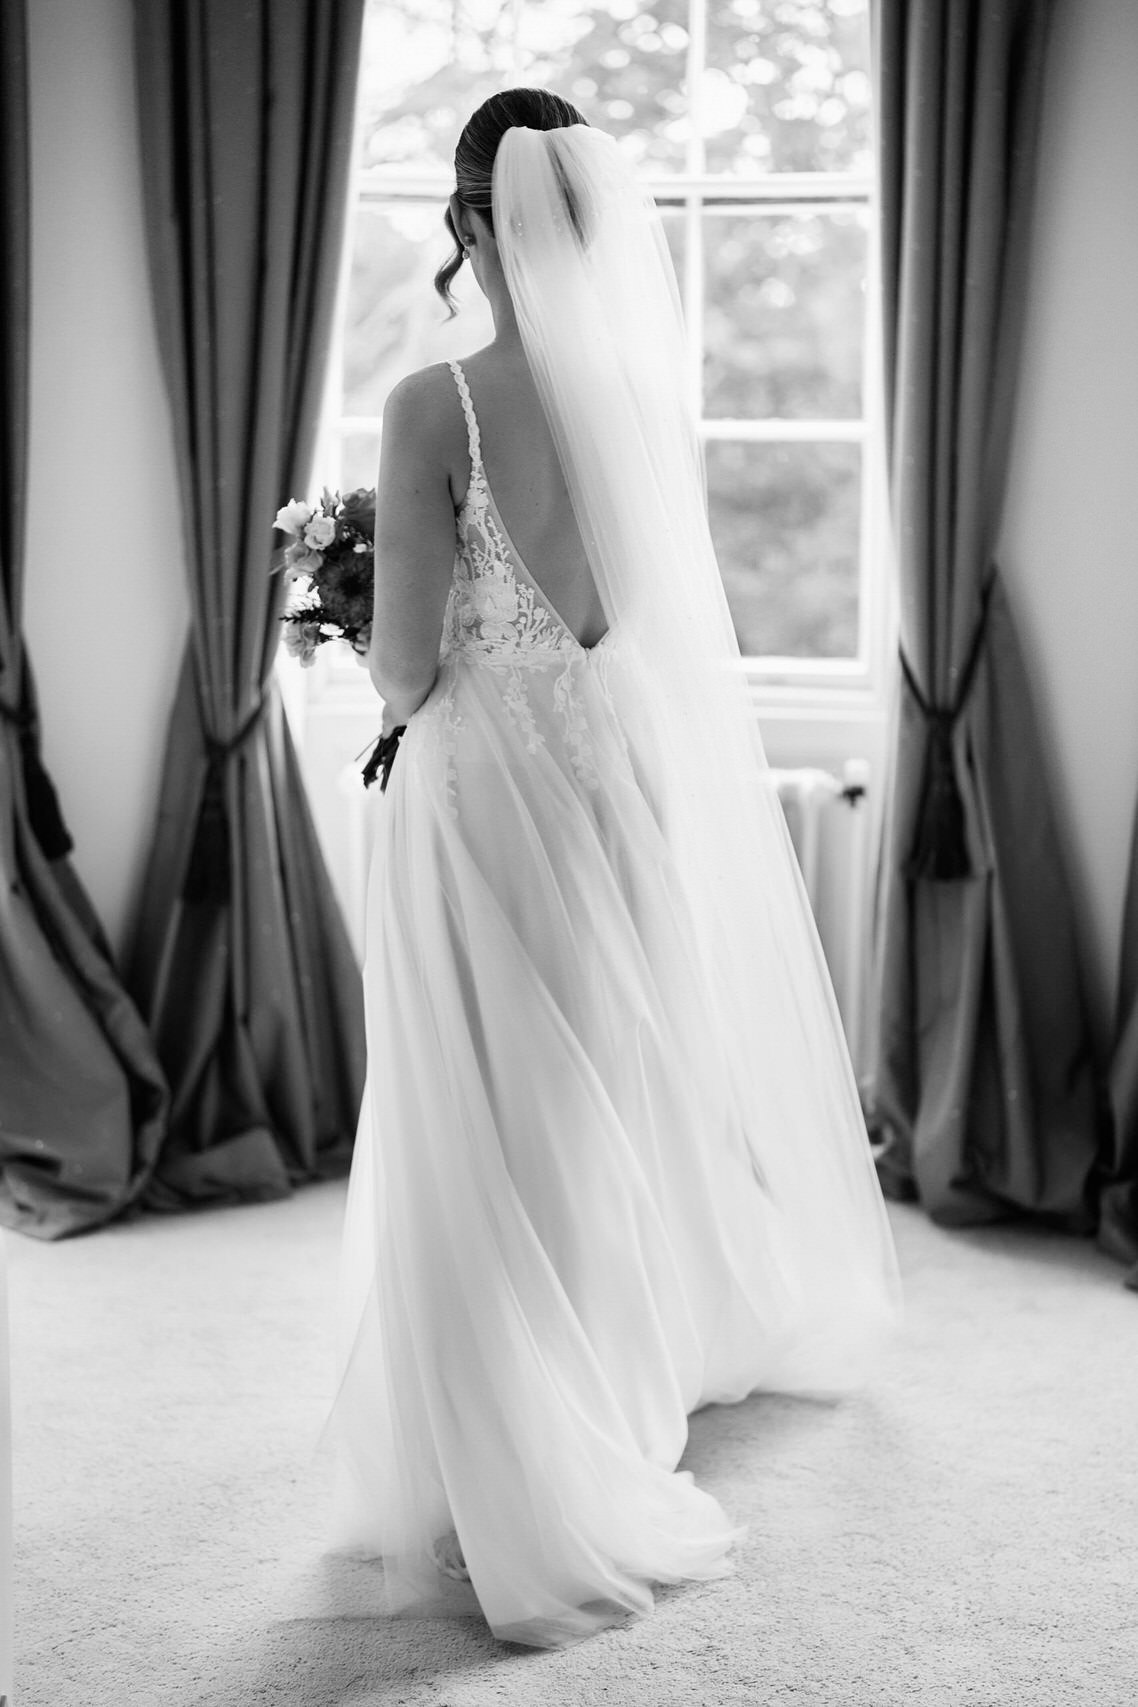 A bride in a wedding dress standing in front of a window.